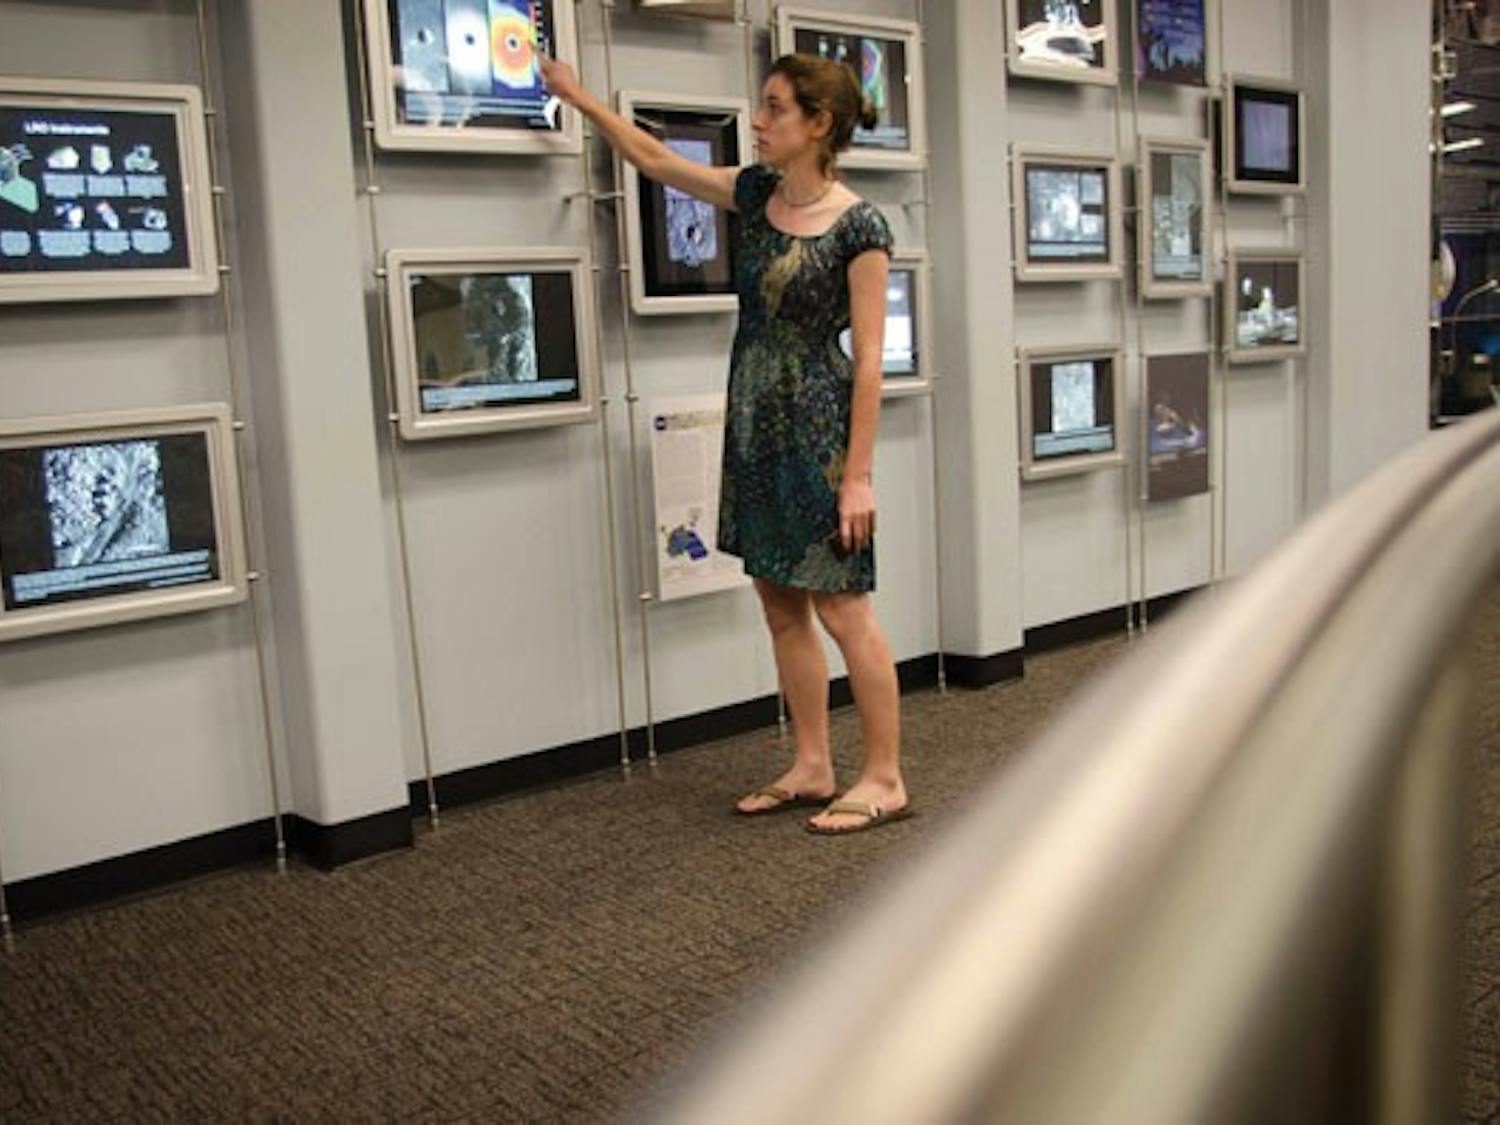 Planetary sciences graduate student Sarah Braden points to a video monitor displaying photos of a lunar volcanic crater on Thursday in the visitor gallery of the ISTB A building on the Tempe campus. (Photo by Aaron Lavinsky)